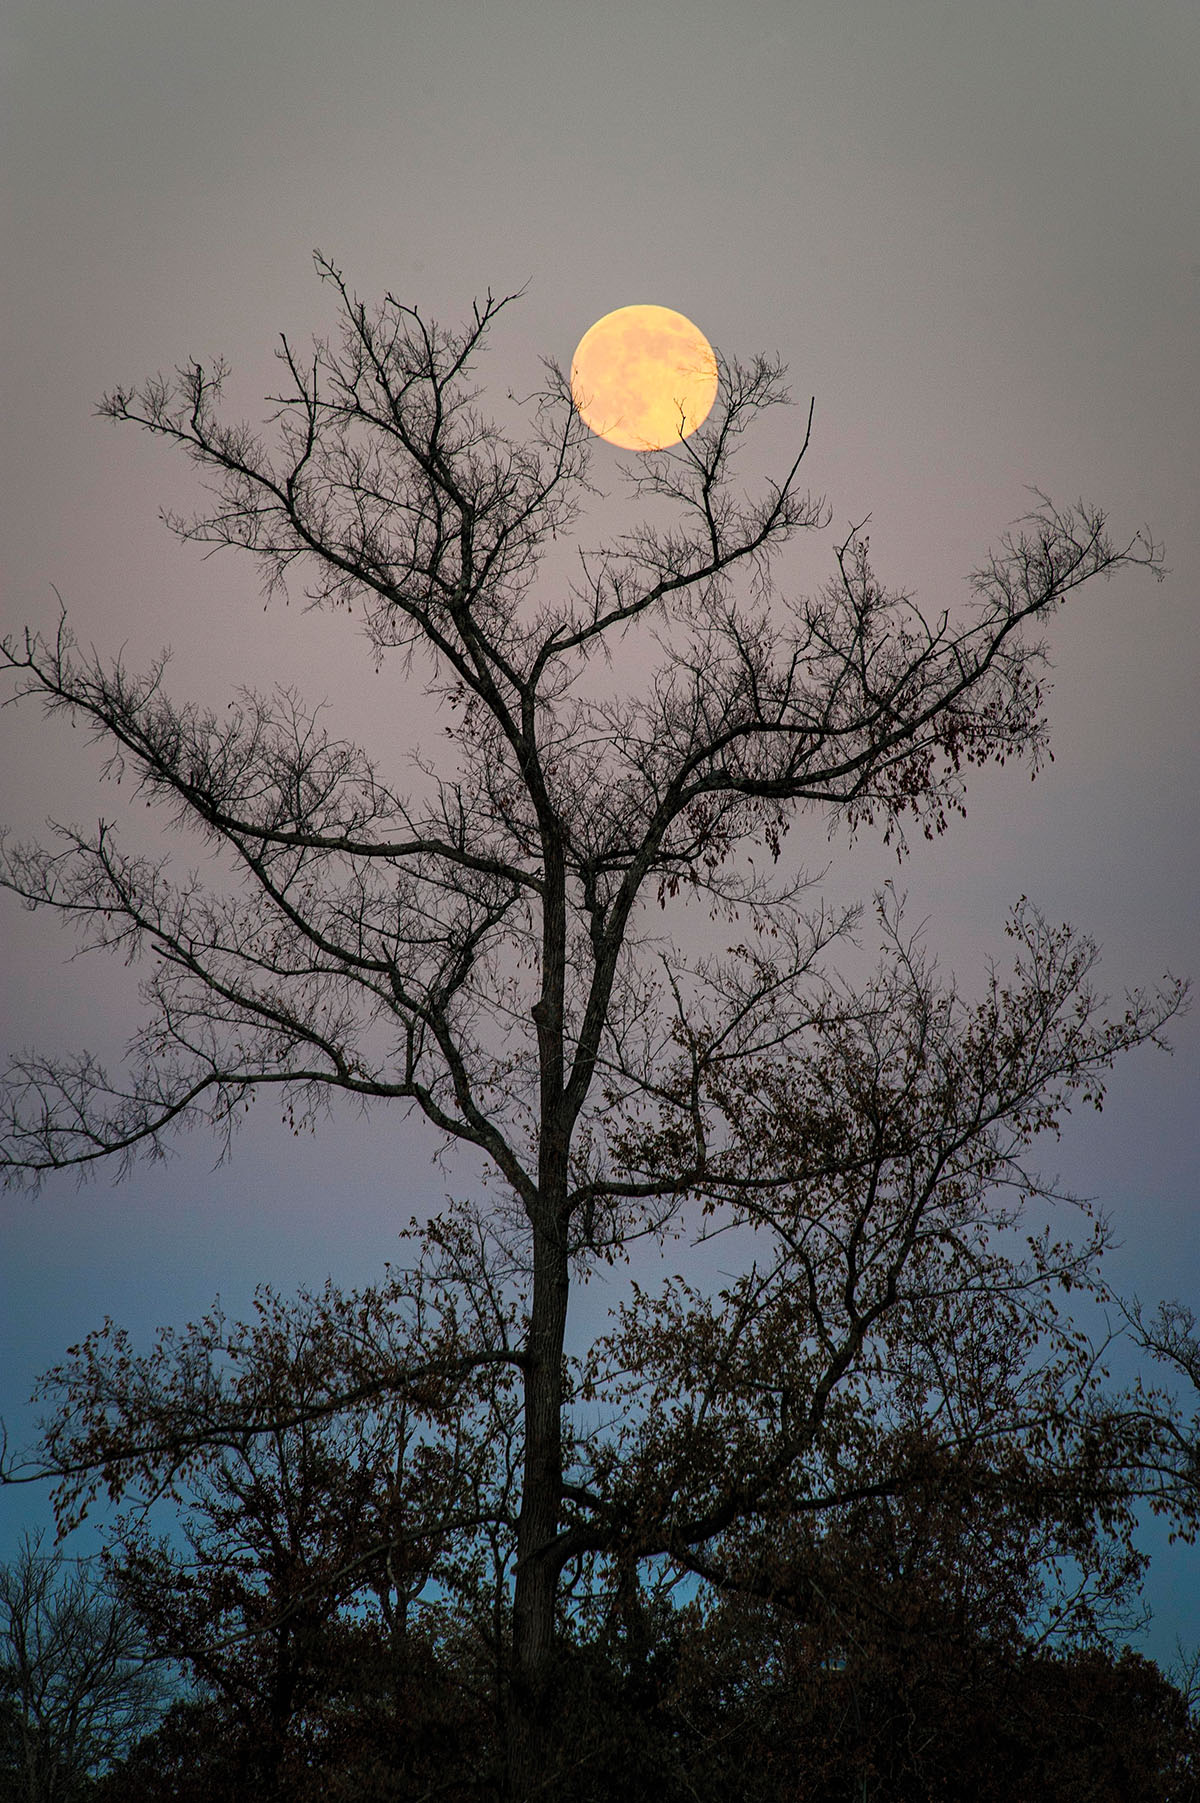 A golden yellow moon rises above a tree with numerous dead branches